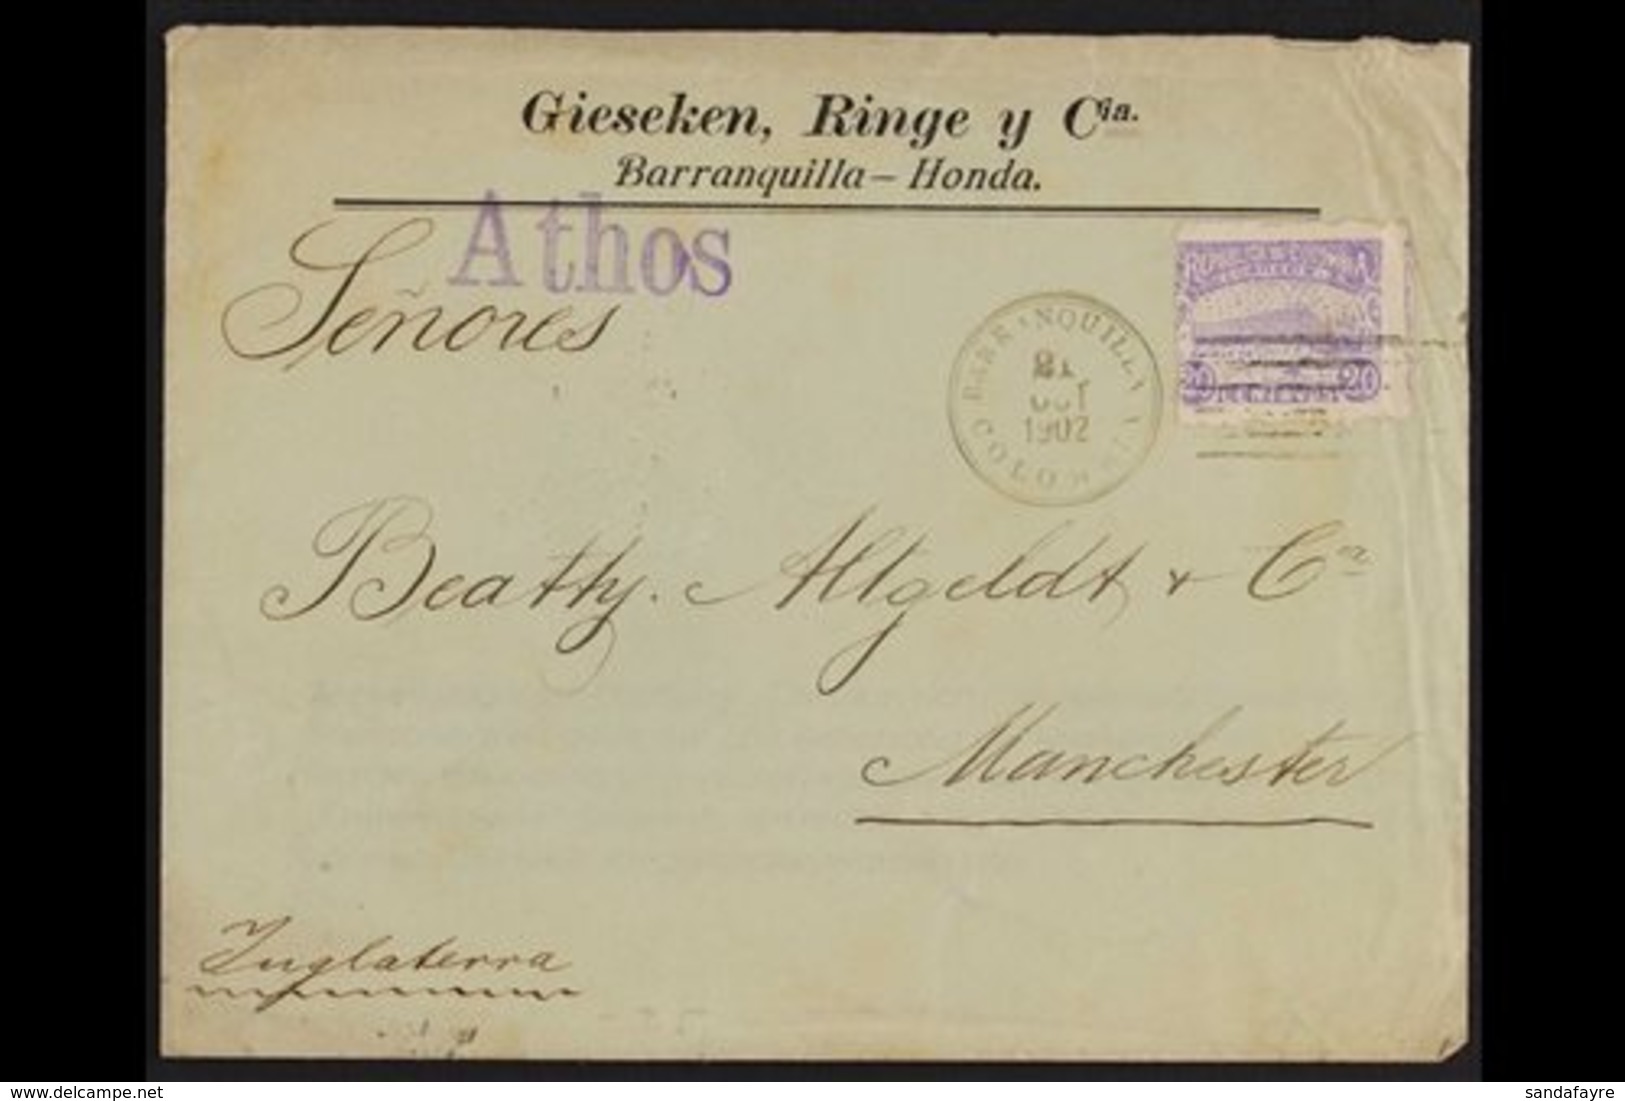 1902 S.S. "ATHOS" SHIP COVER. 1902 (Oct) Cover Addressed To Manchester, England, Bearing 20c Stamp Tied By "Barranquilla - Kolumbien